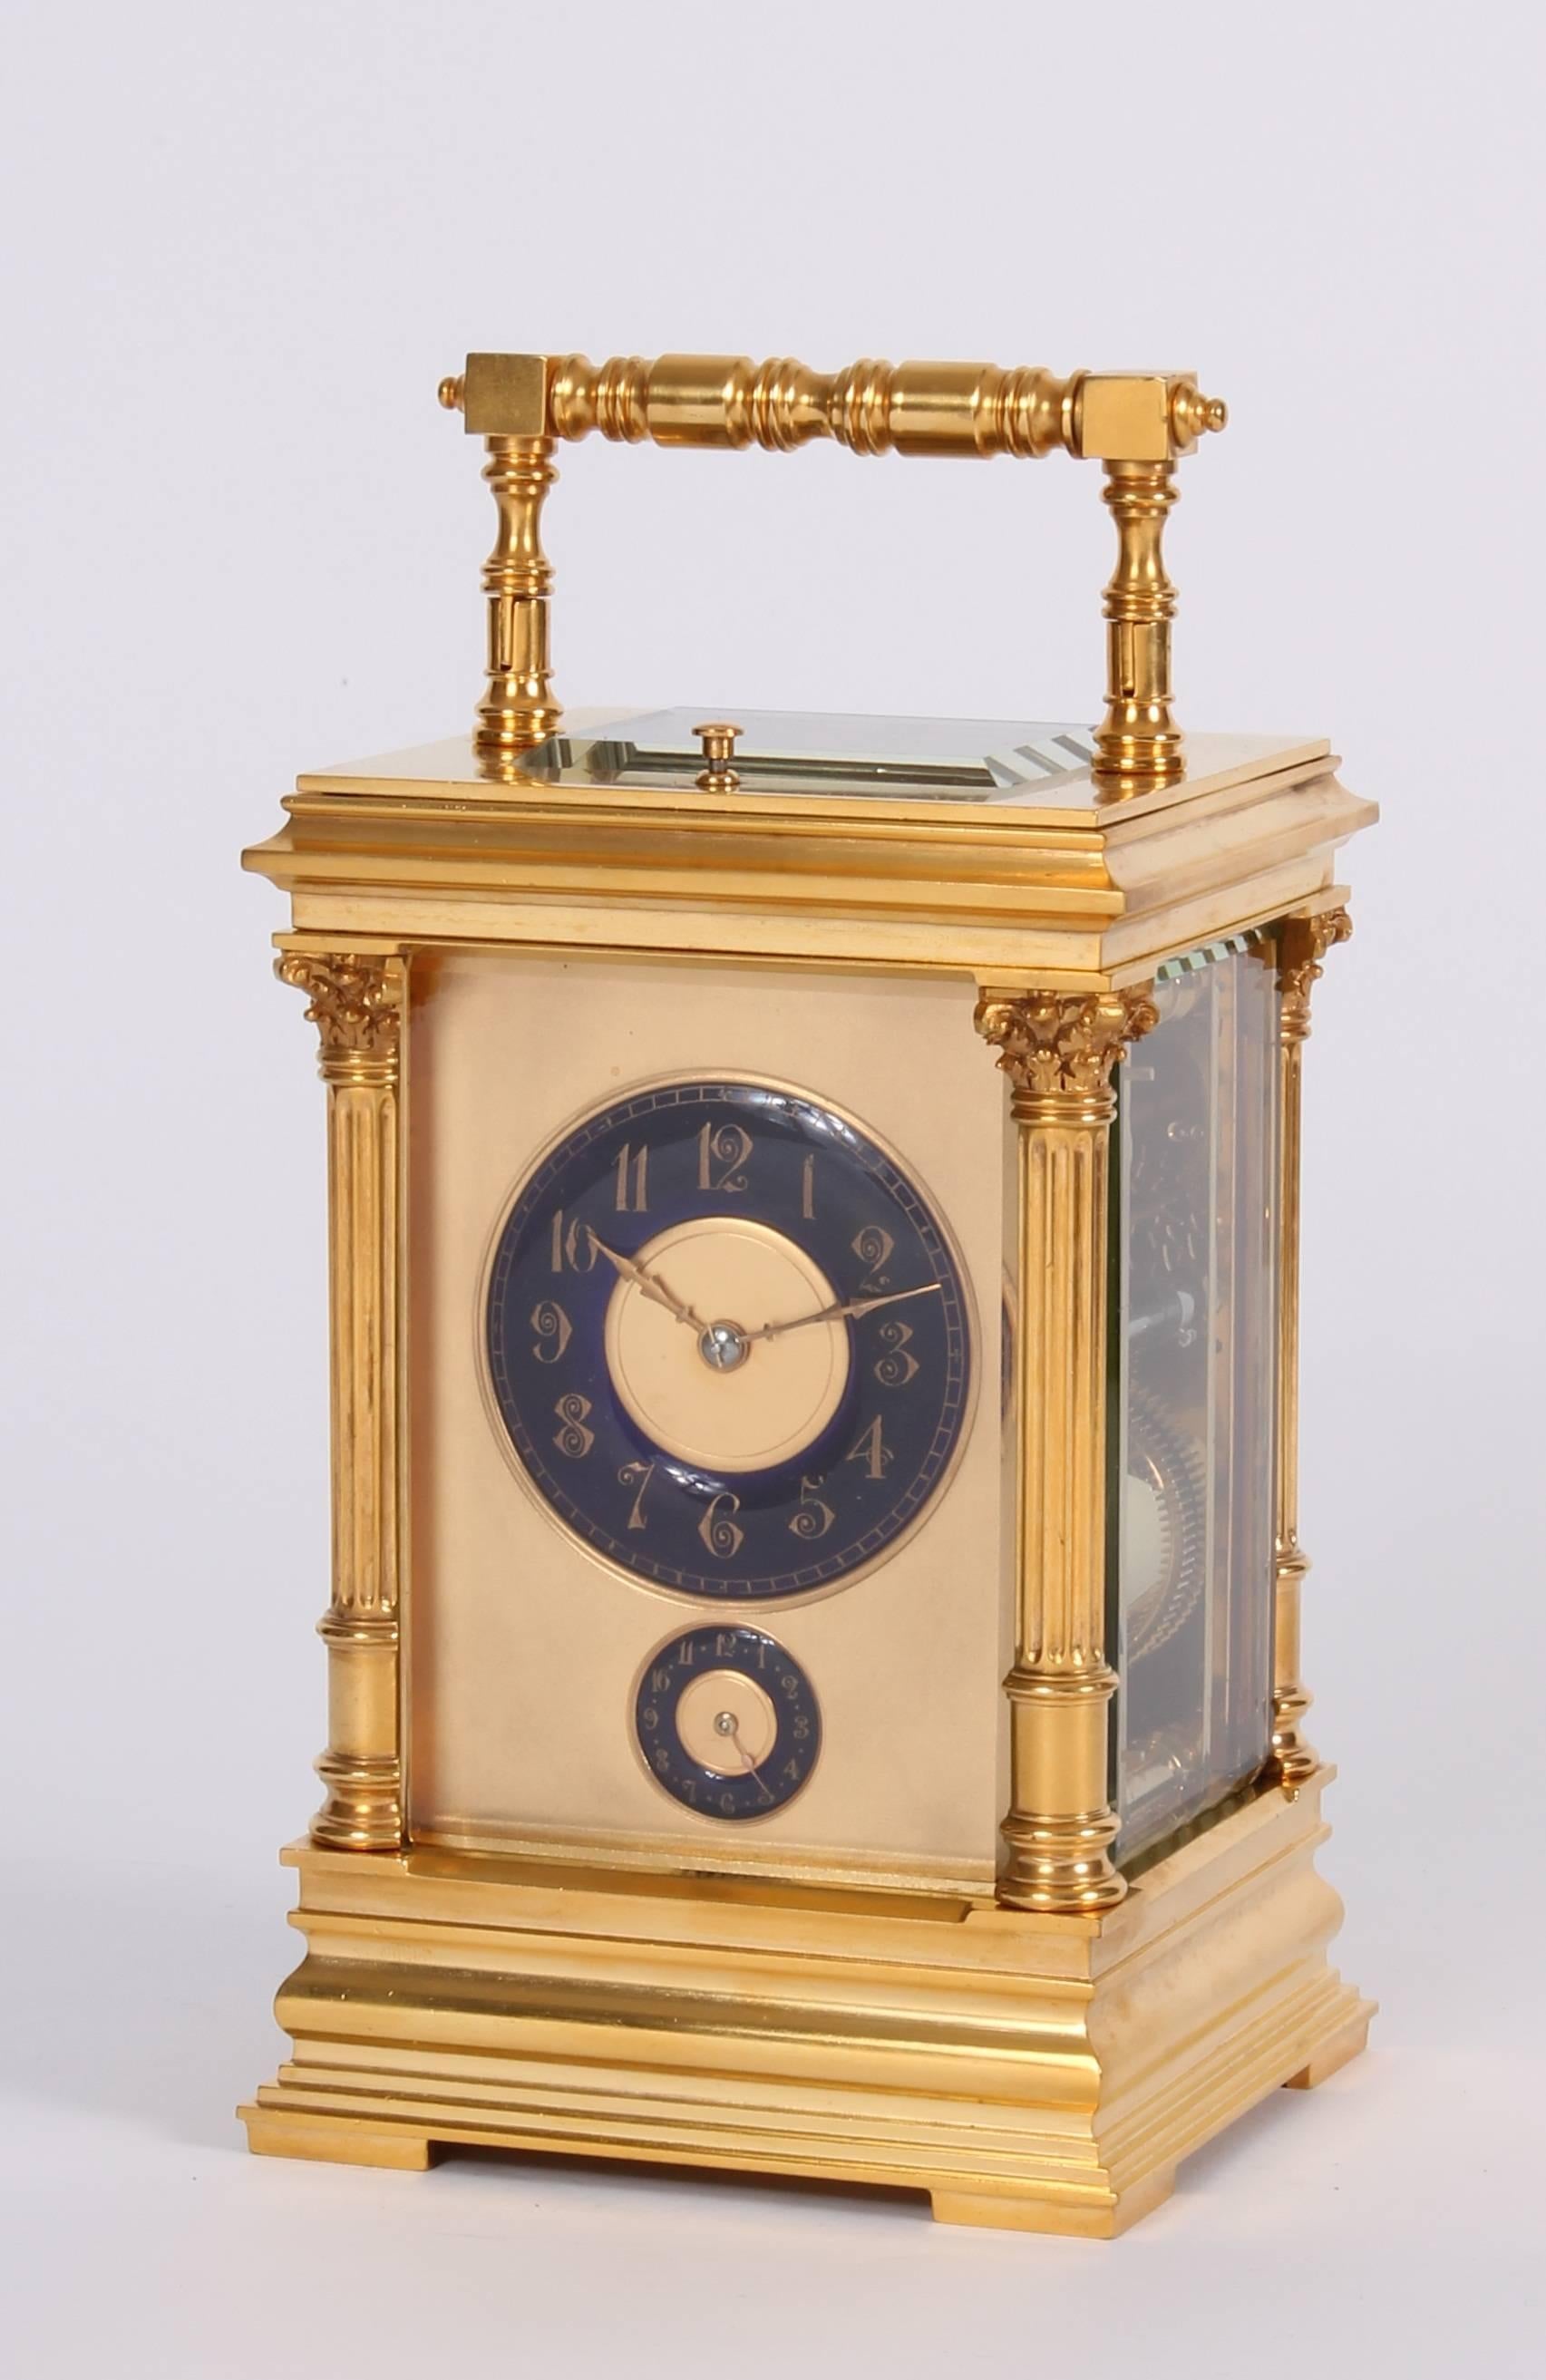 A French gilt brass carriage clock with rare blue enamel dials in Anglaise case, circa 1890.

Blue enamel chapter rings with Arabic numerals for time and alarm below, 8-day spring driven movement with platform lever escapement, trip repeating half